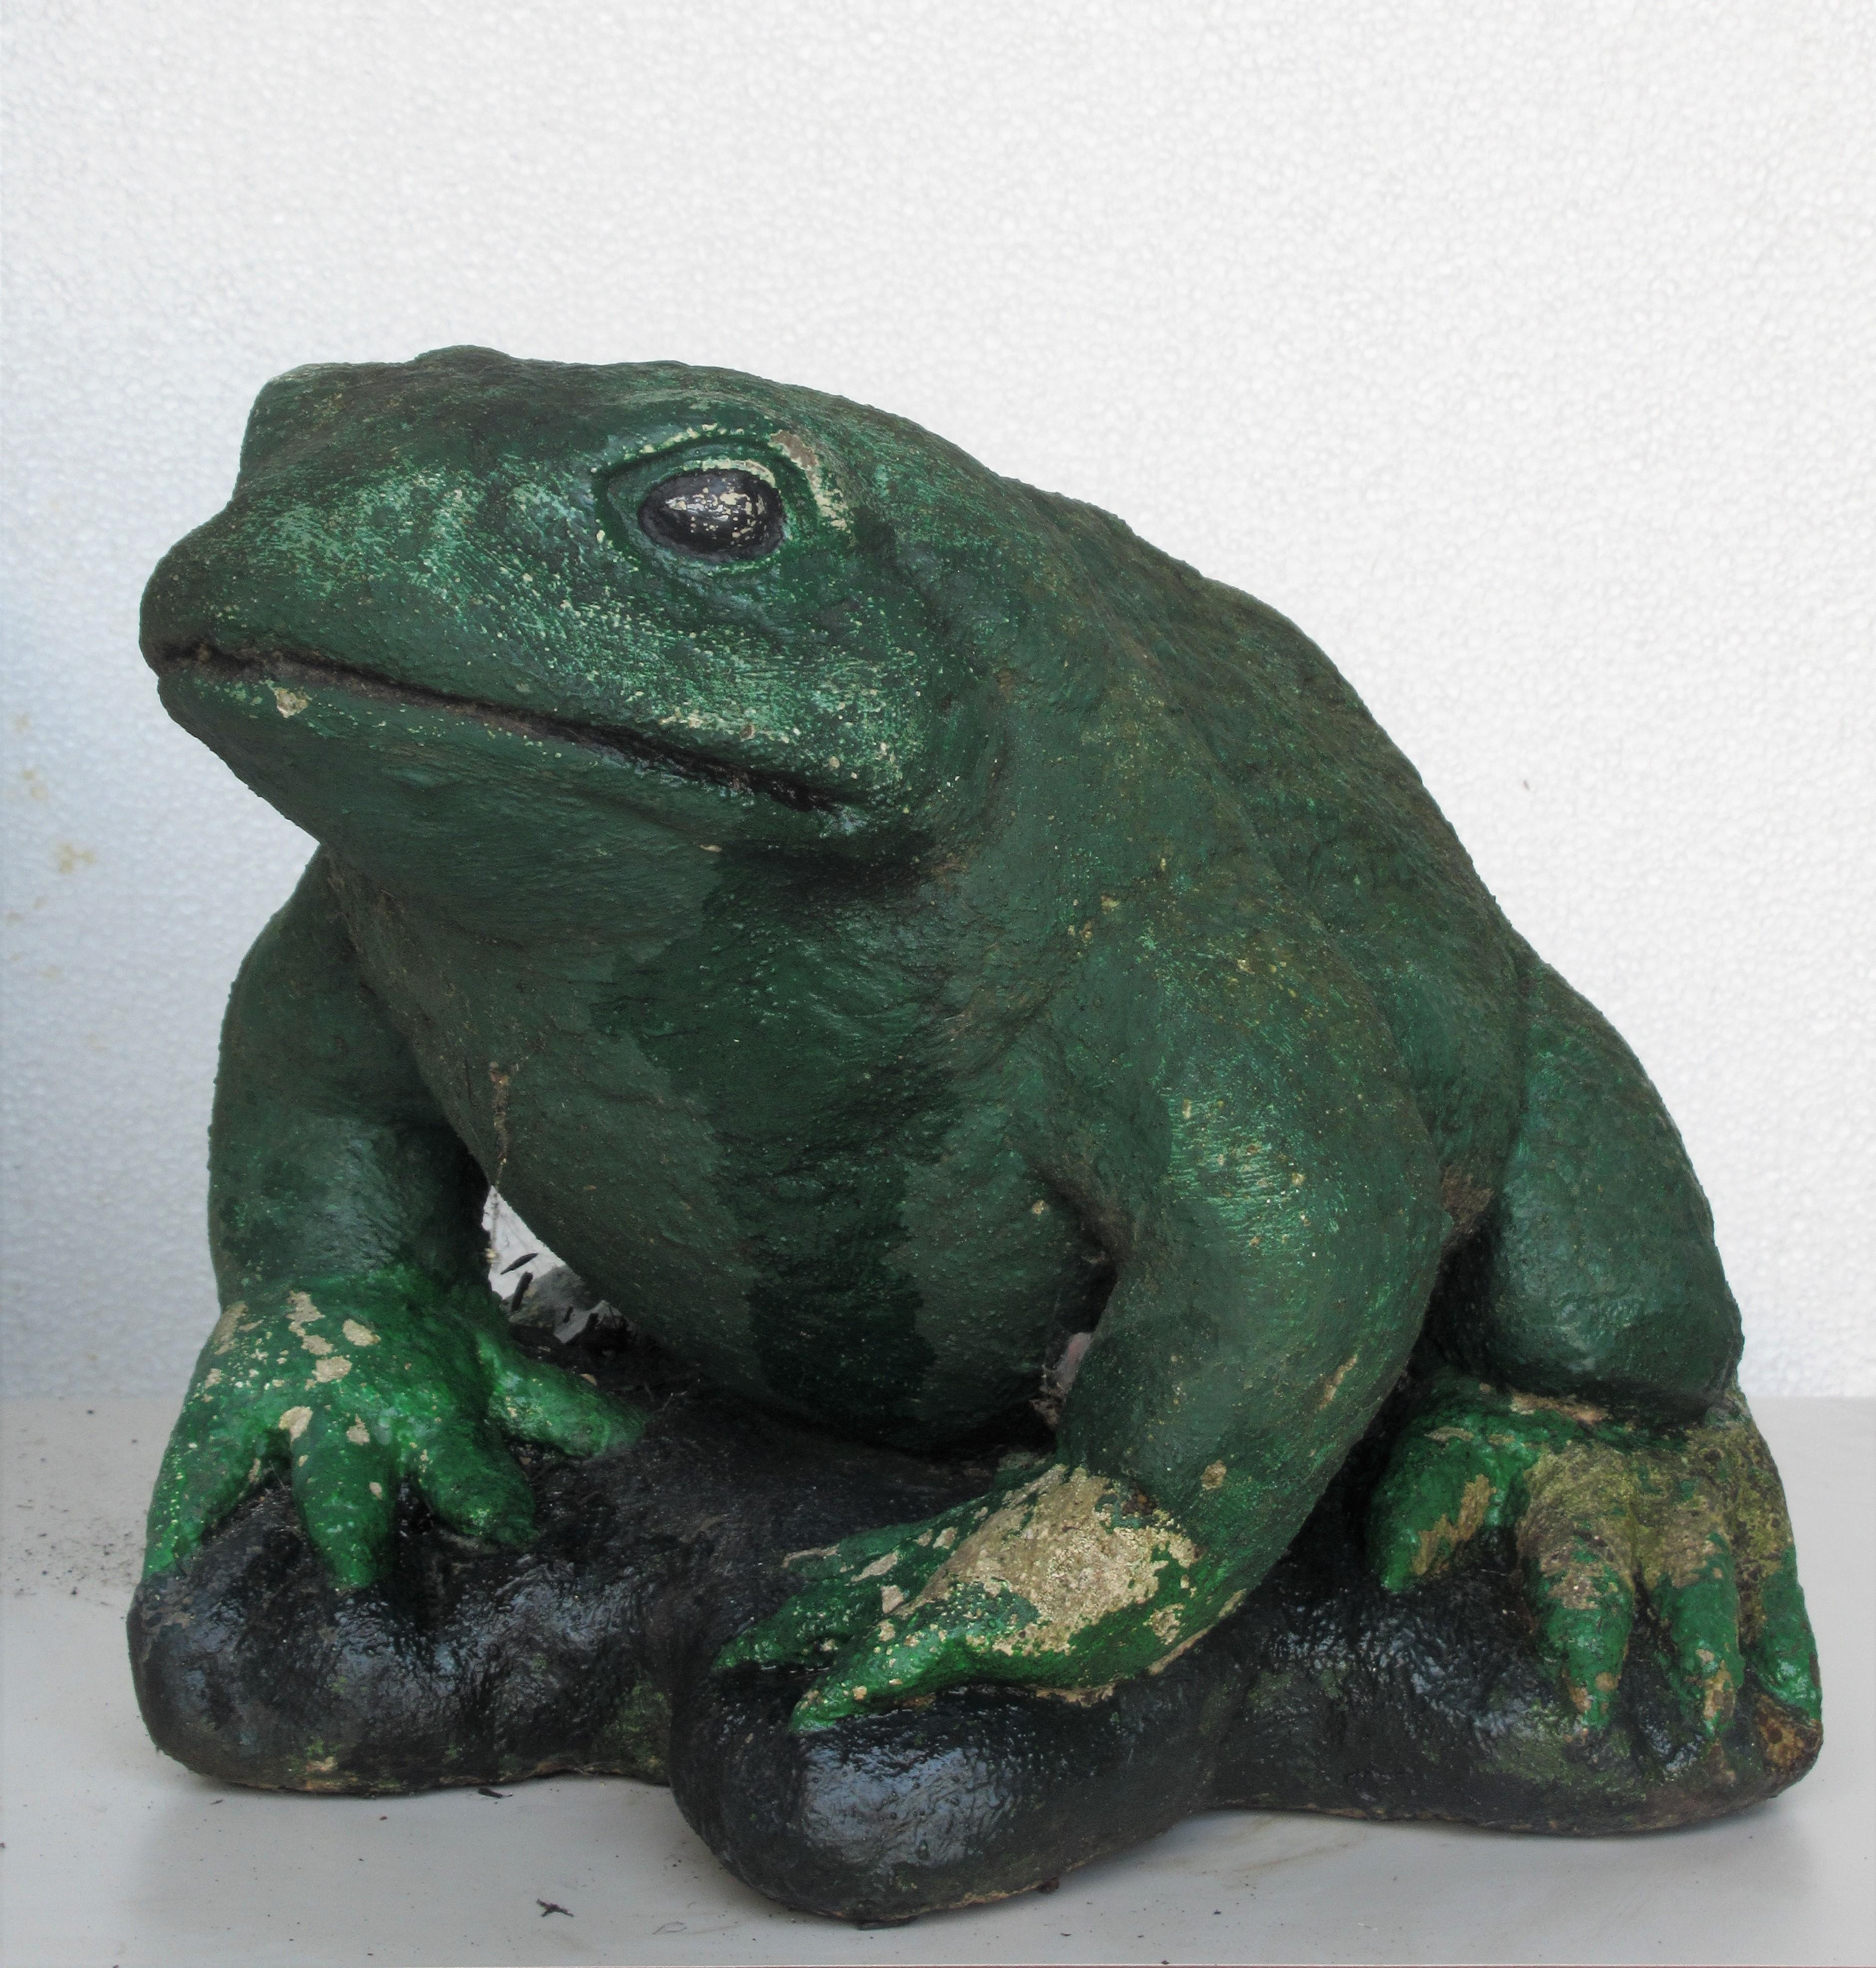  Old Painted Stone Garden Toads 3